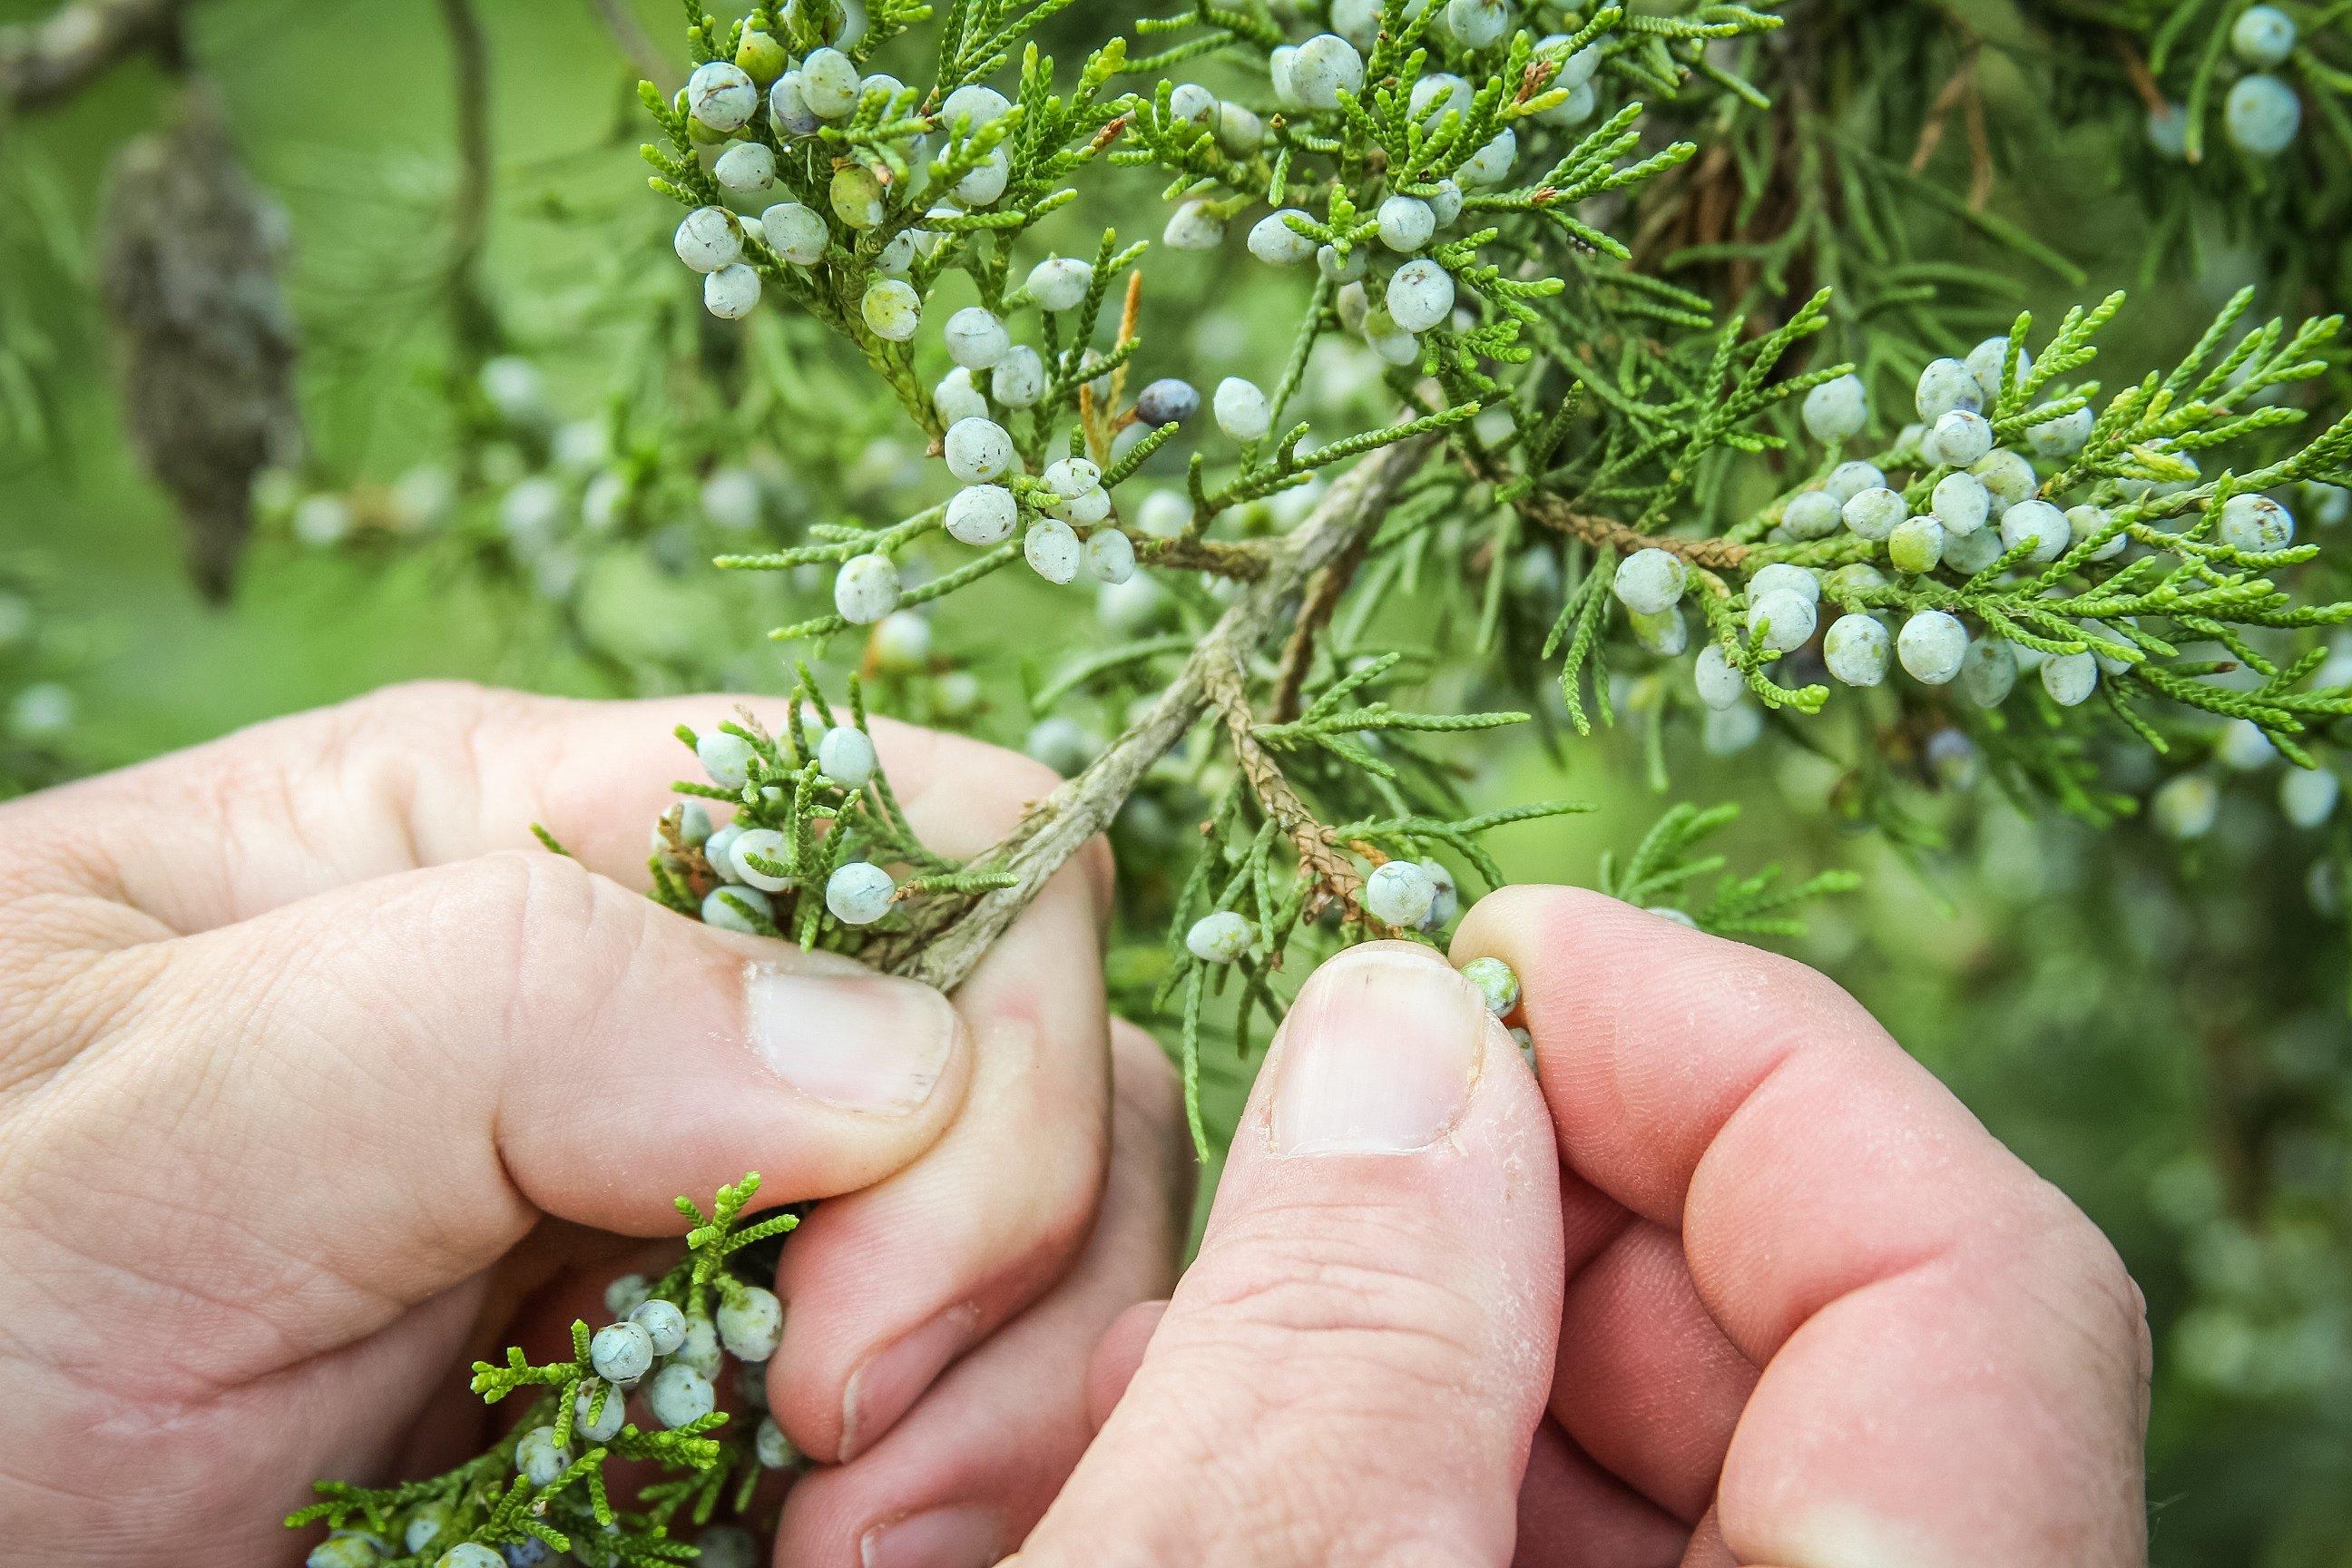 Picking goes quickly when you find a tree loaded with berries.